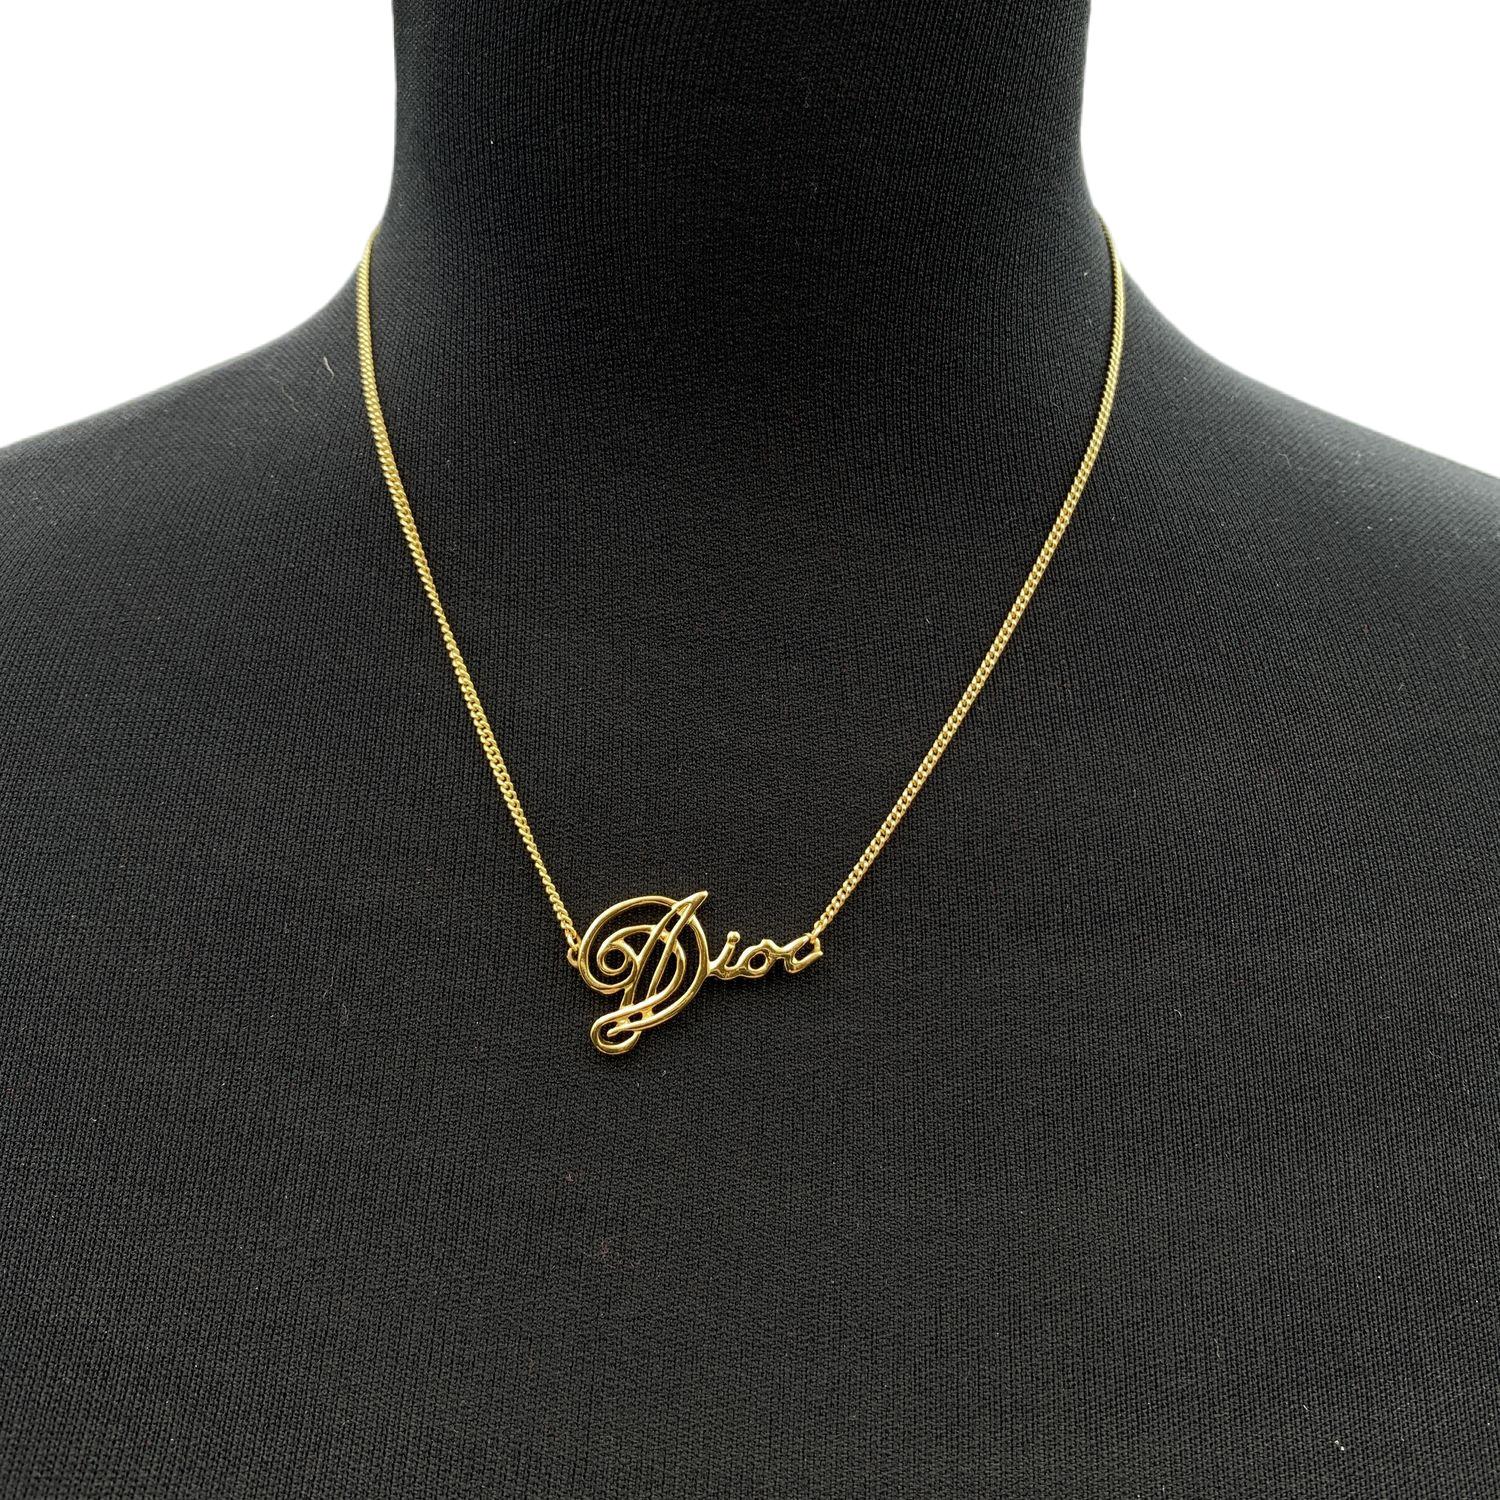 Vintage Christian Dior gold metal necklace with Dior signature pendant. Lobster closure. Small CD - Dior charm at the end of the necklace. Max chain length: about 17.5 inches - 44.5 cm . Christian Dior box included.

Condition

A - EXCELLENT

Gently